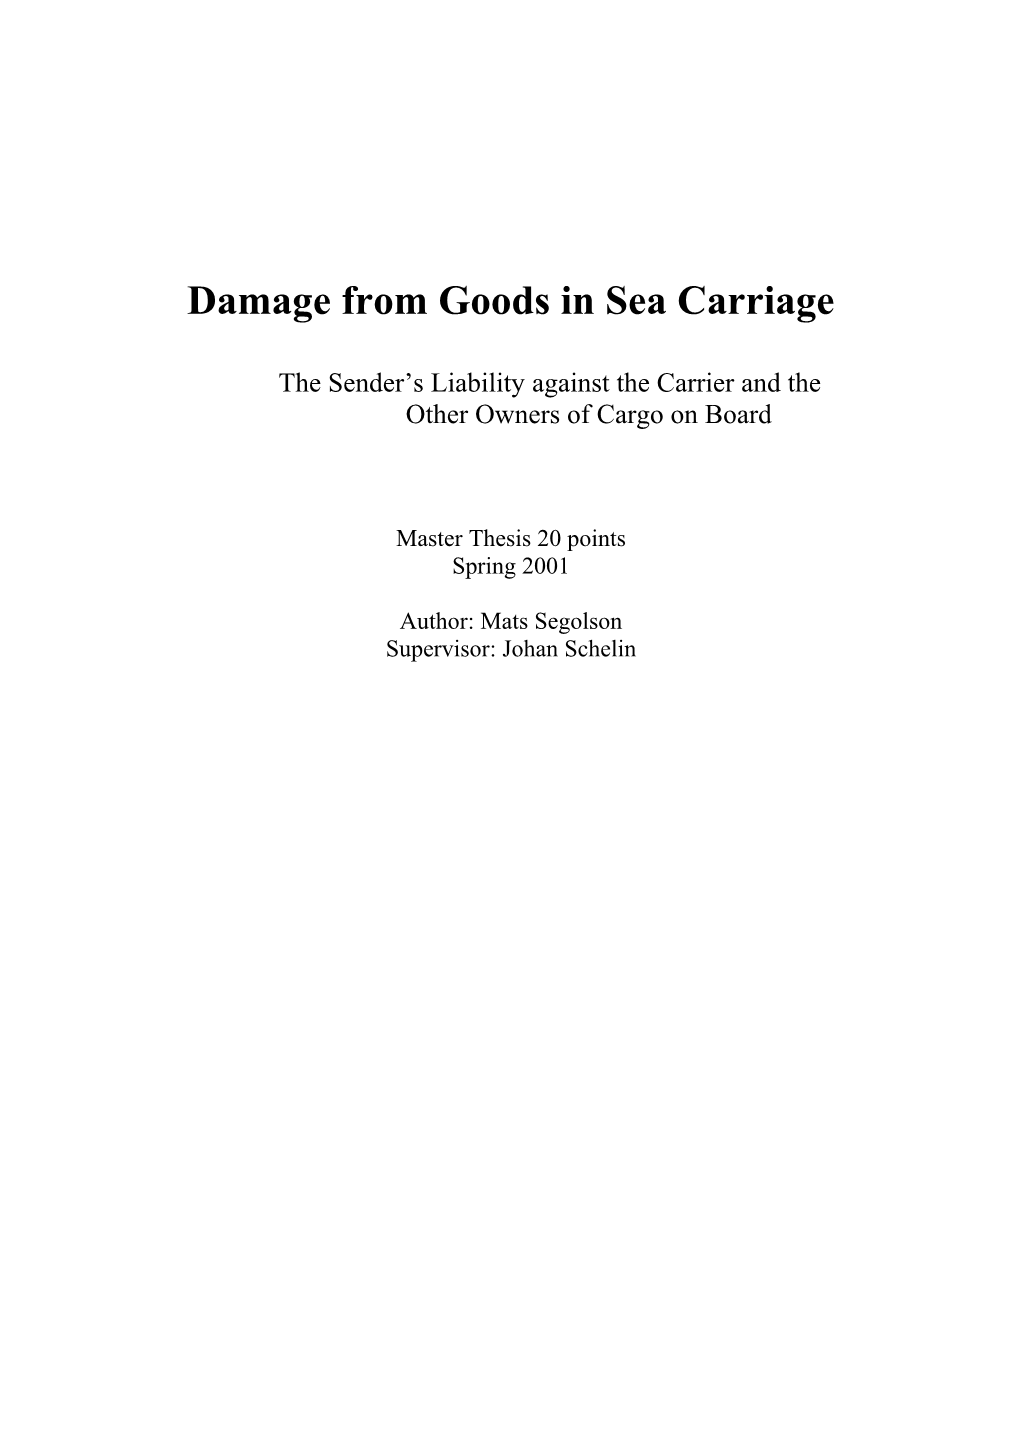 Damage from Goods in Sea Carriage - Segolson Rev